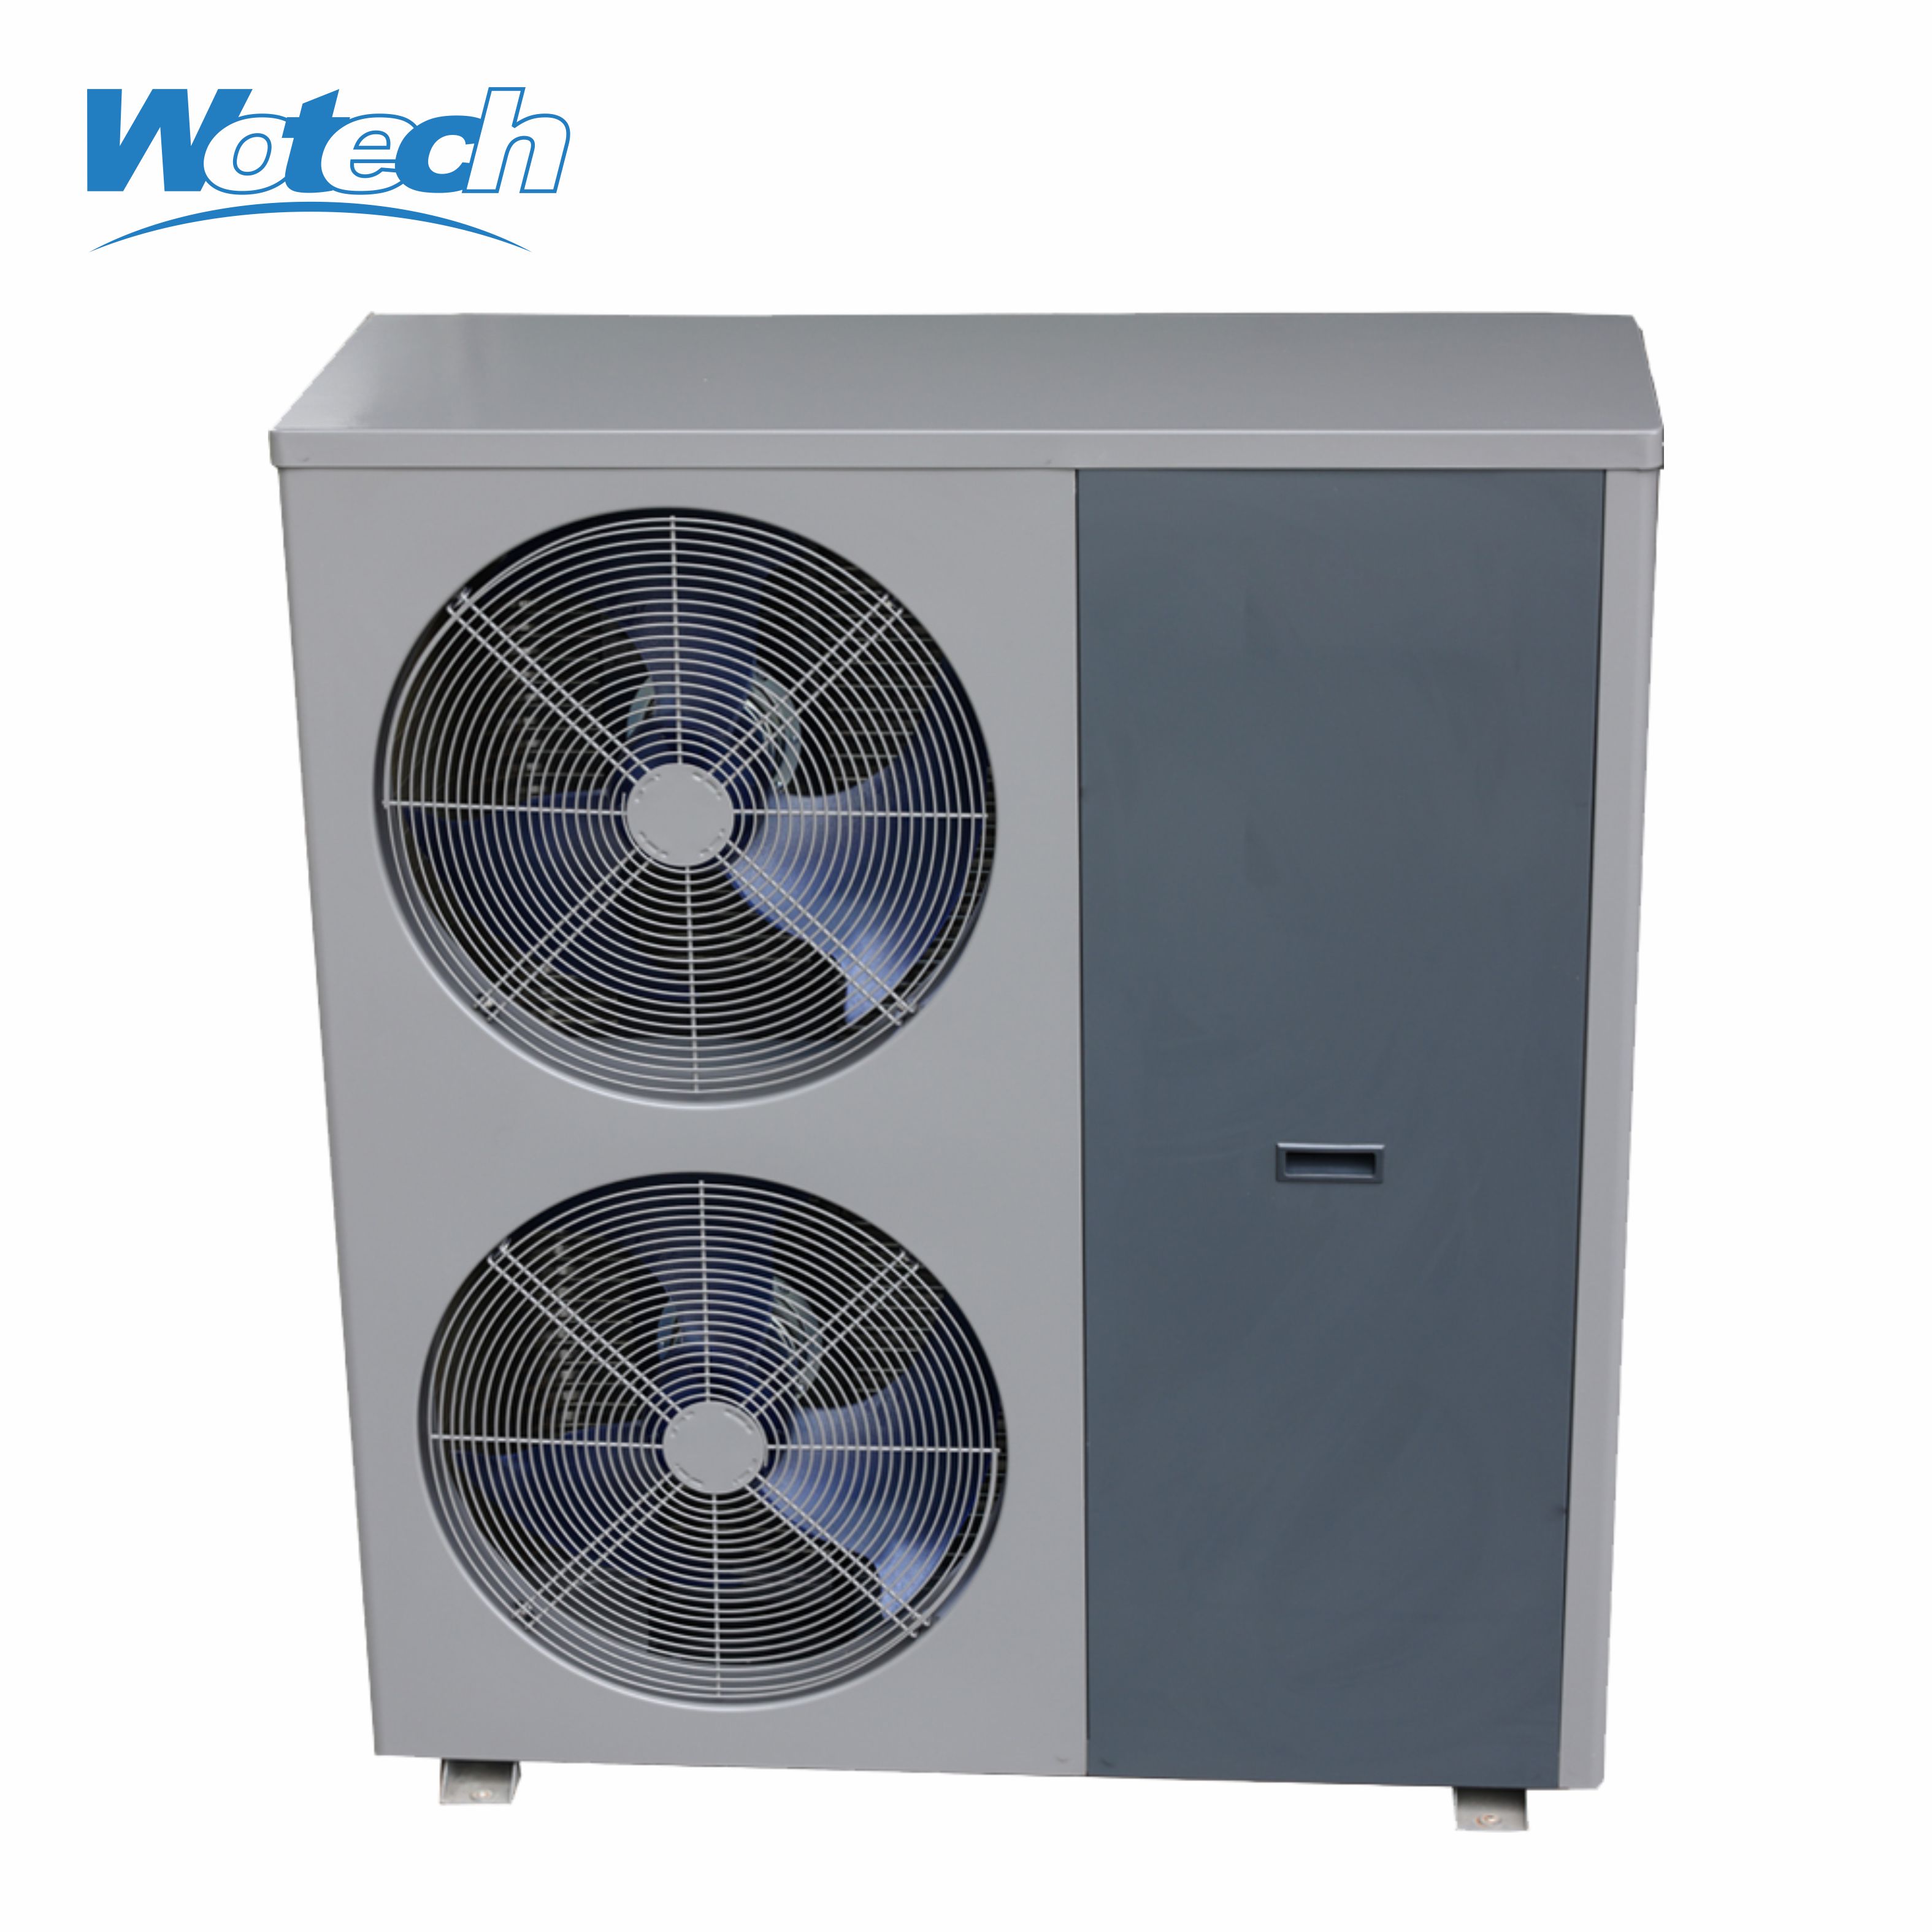 R32 Fixed Frequency Domesittic Air Source Heat Pump with Smart Control And Wifi Function